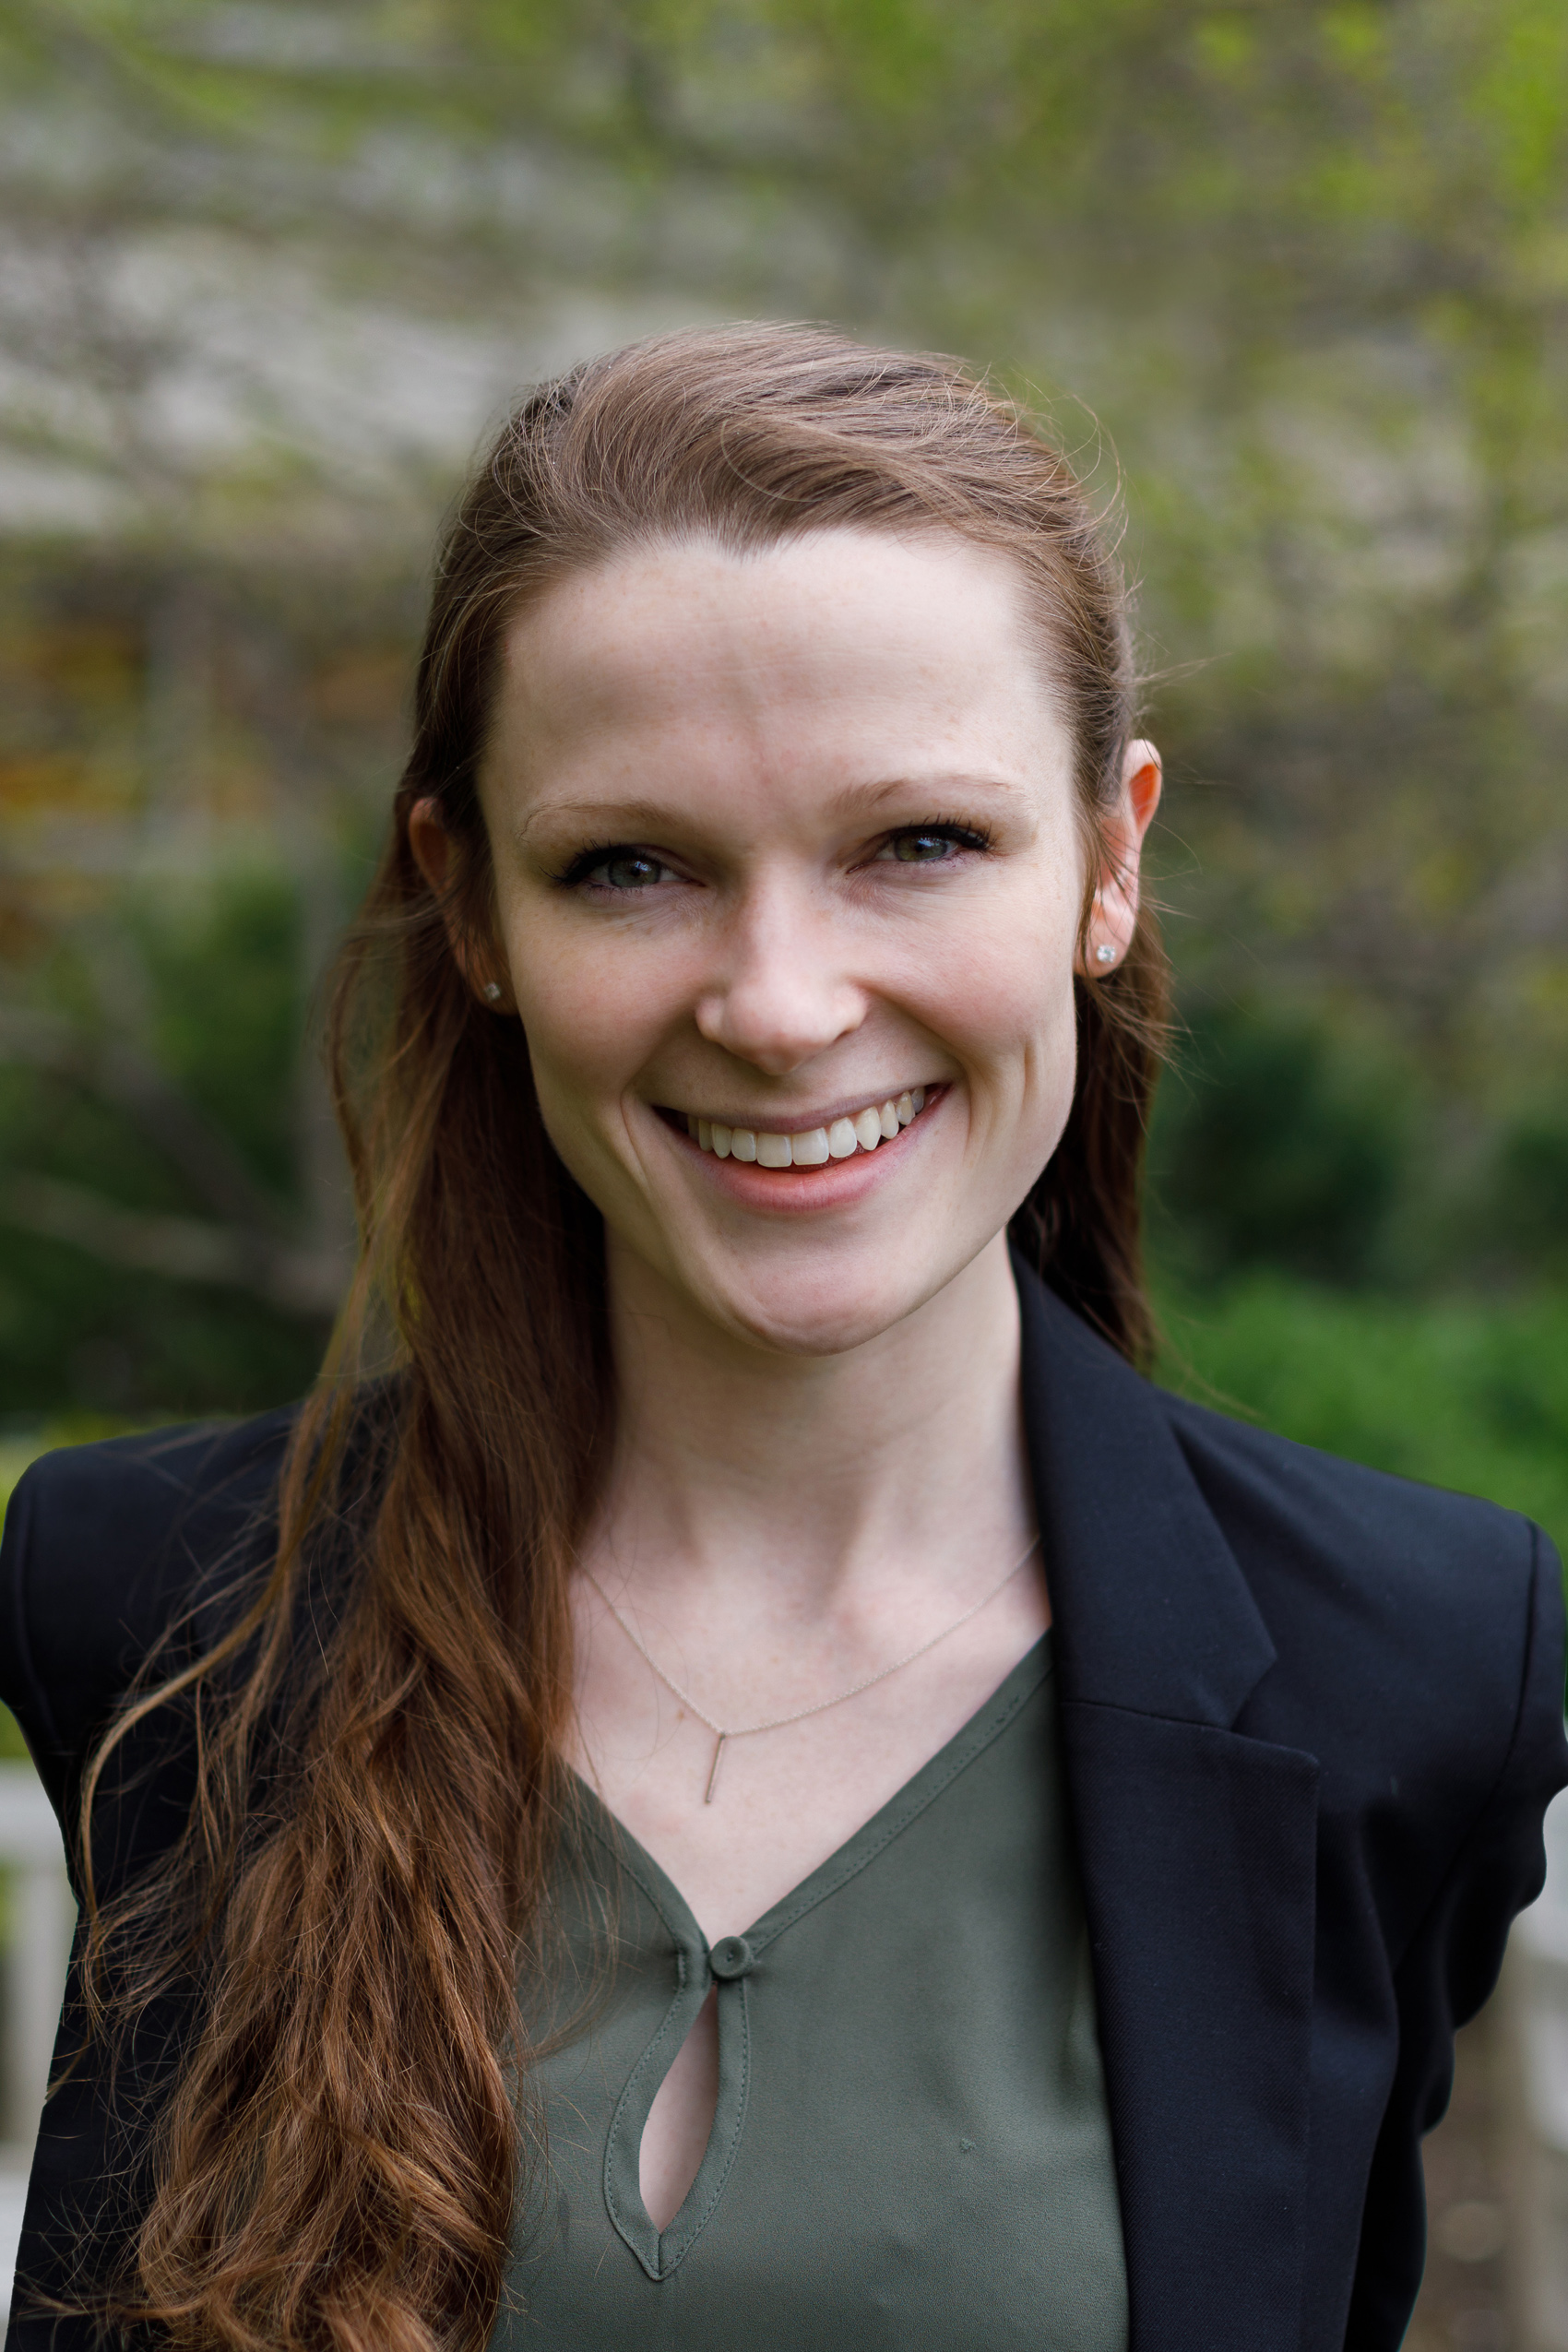 Madeleine Rogers wearing black jacket and olive-green shirt smiling into camera.  